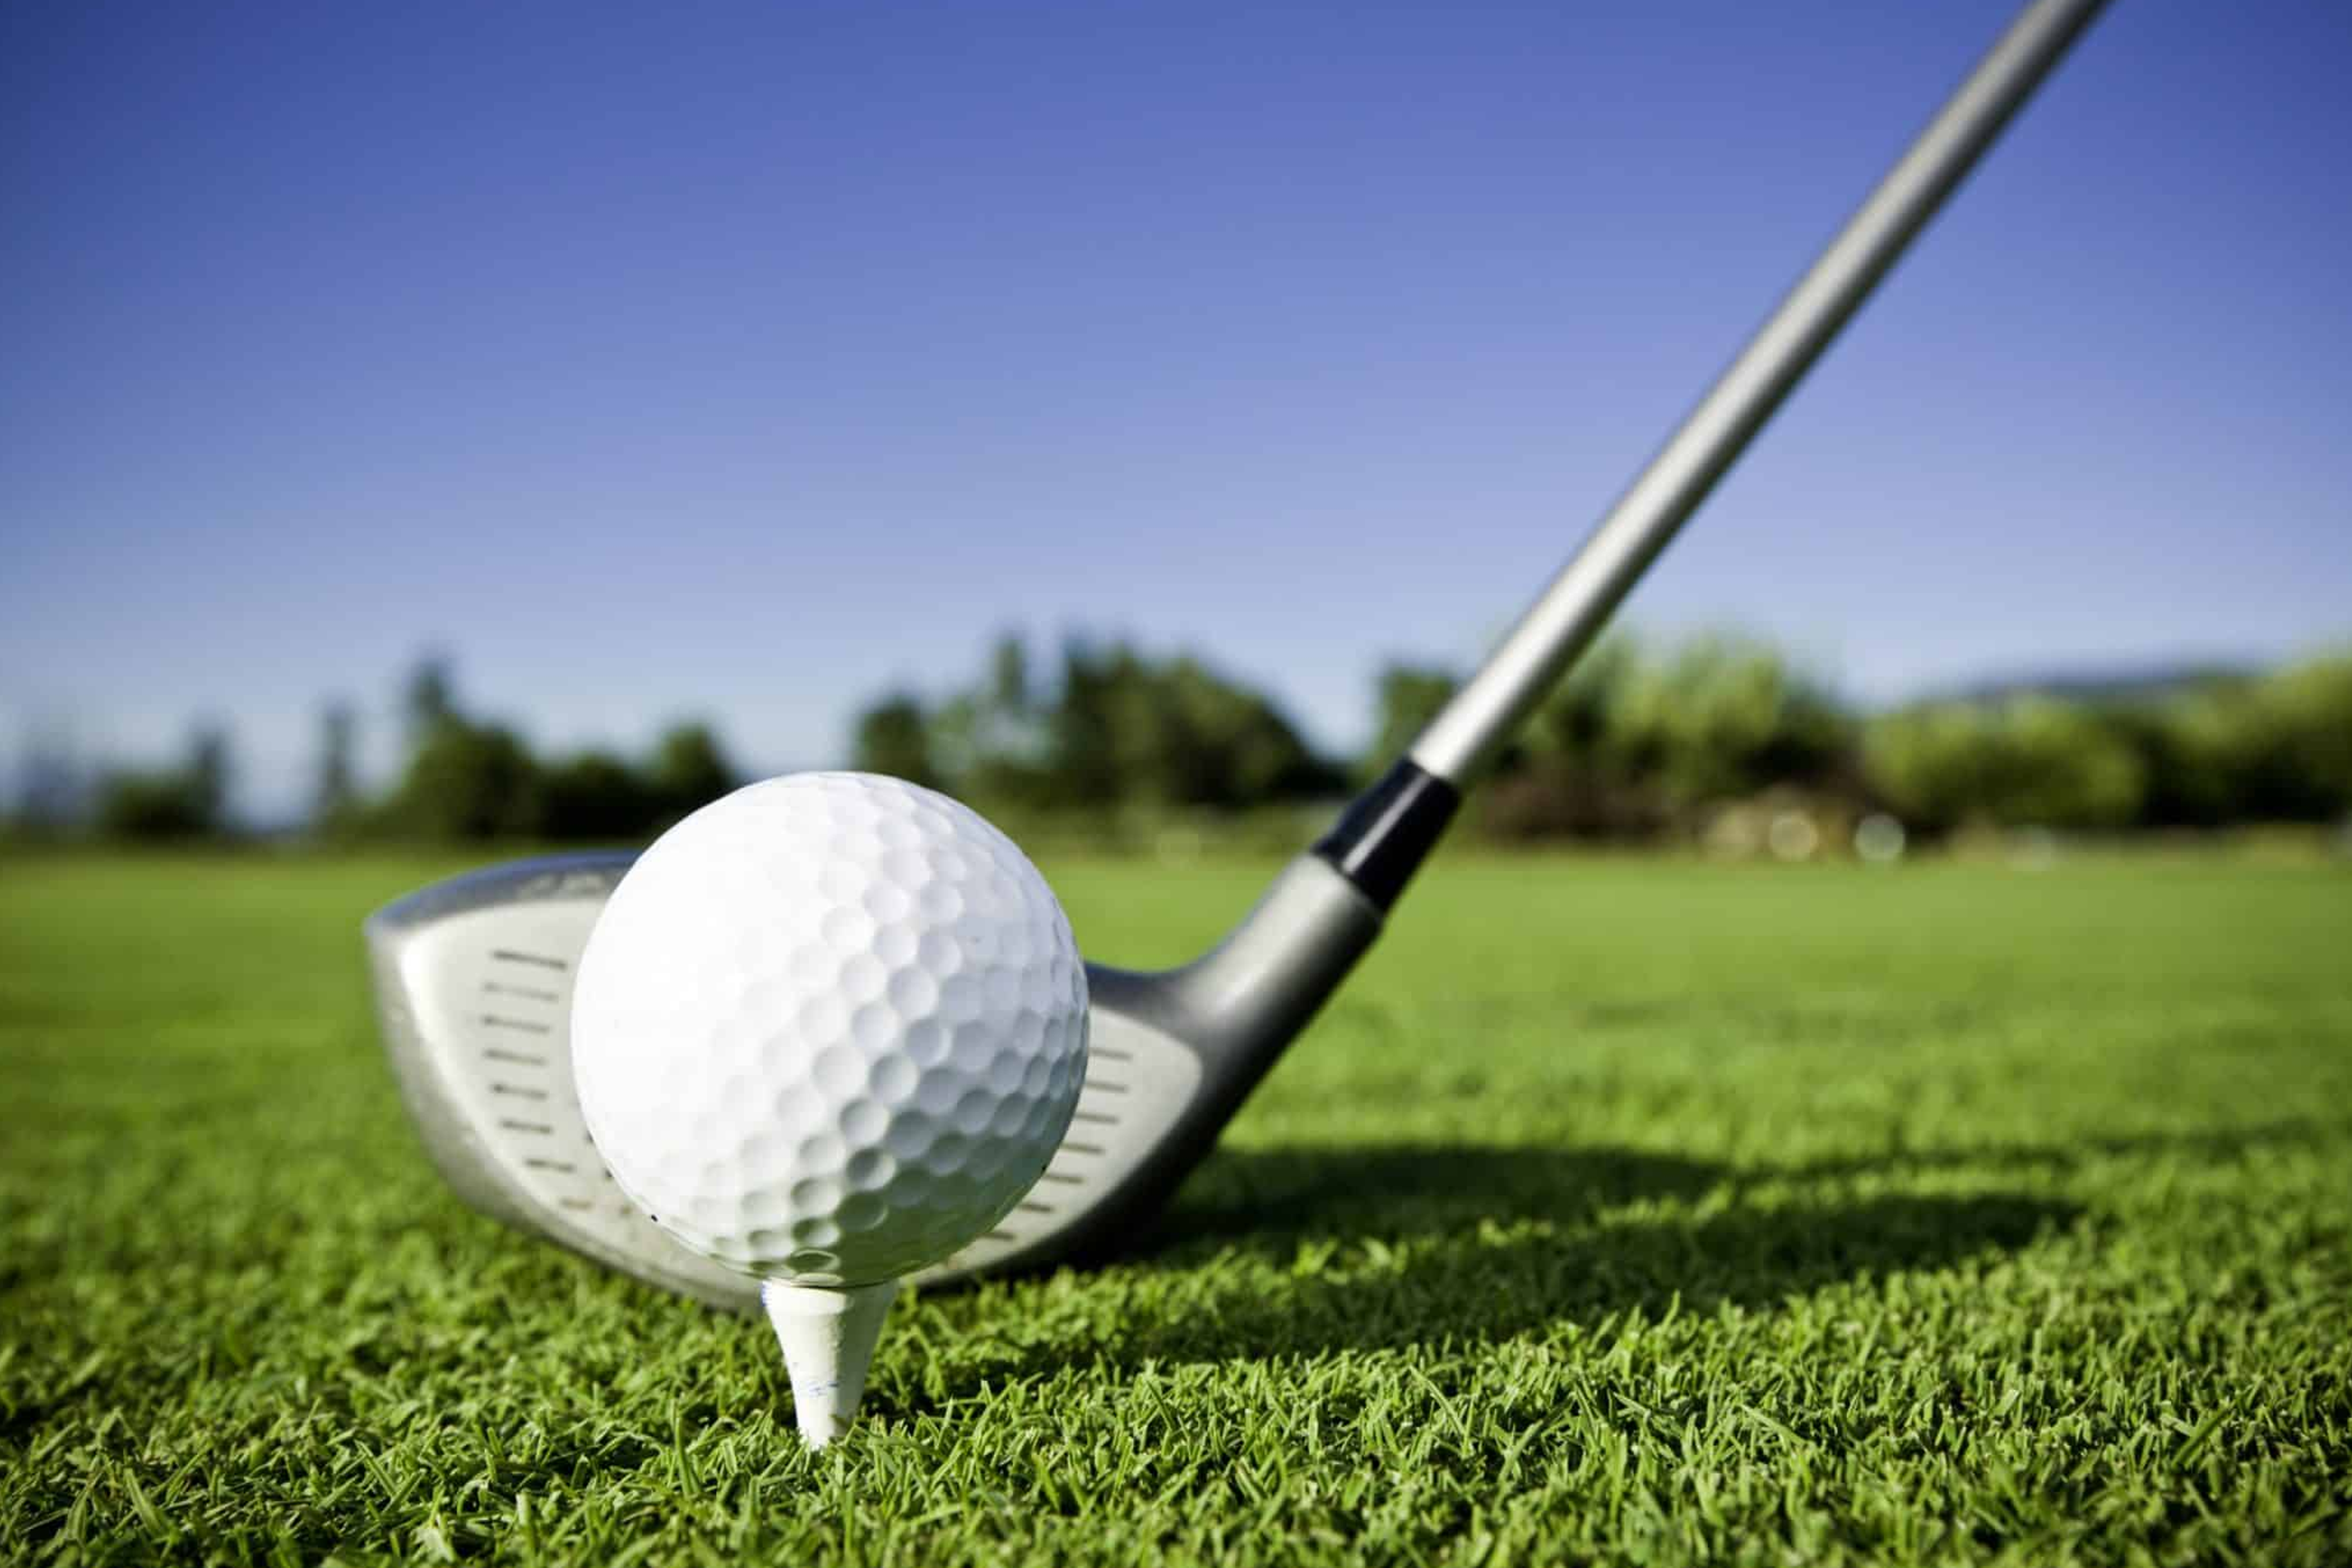 Register for the NYITCOM Golf Classic